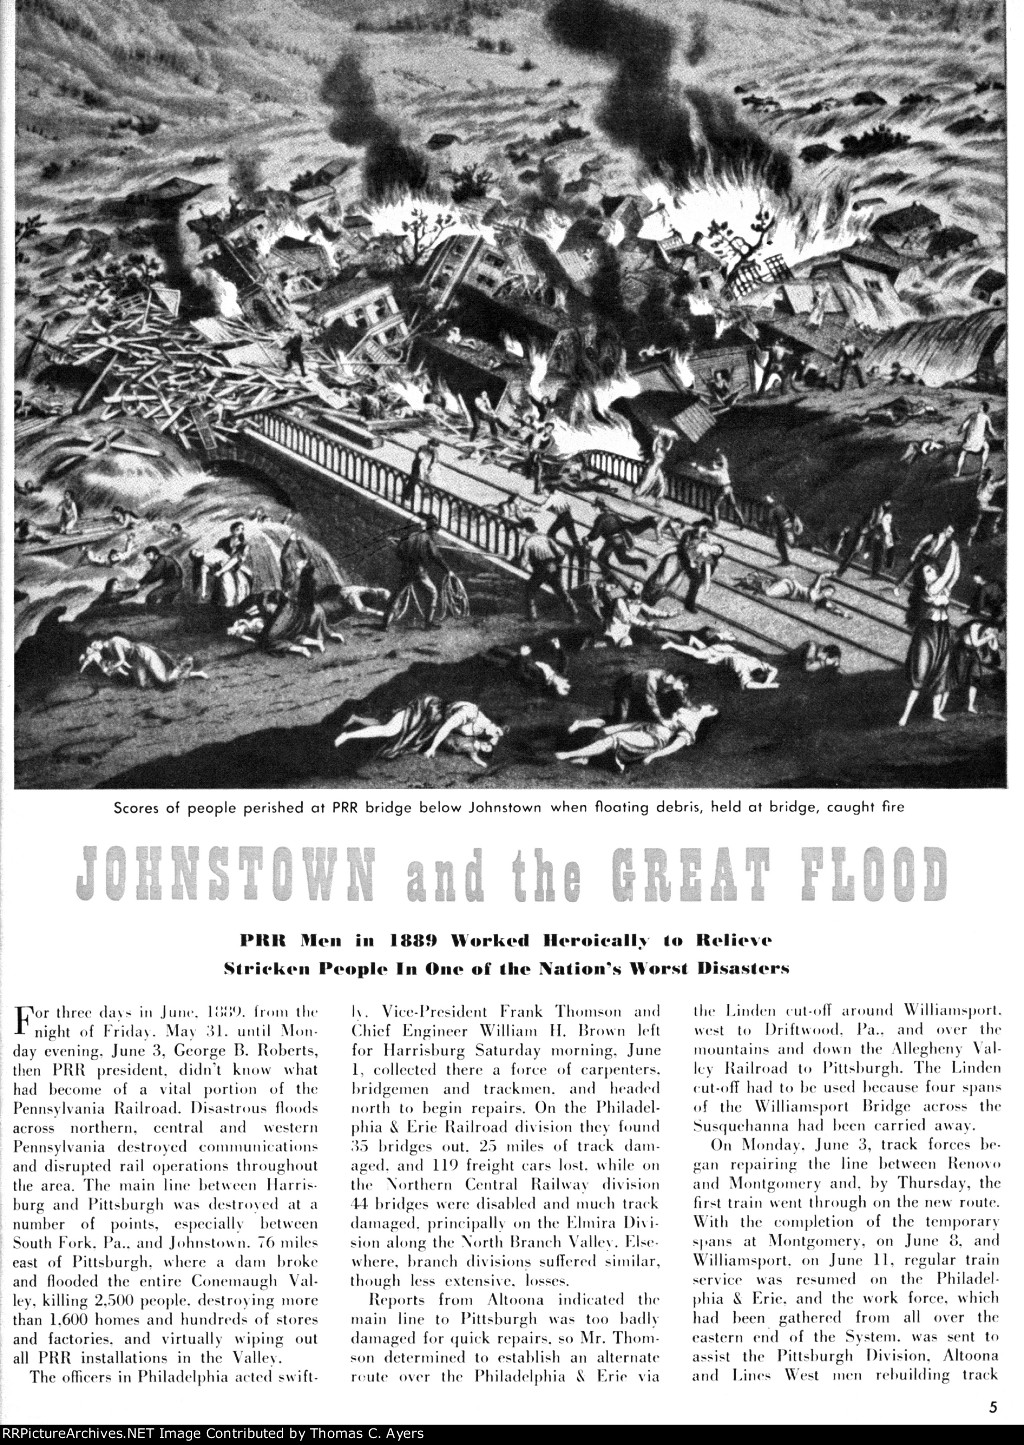 "The Great Flood," Page 5, 1953